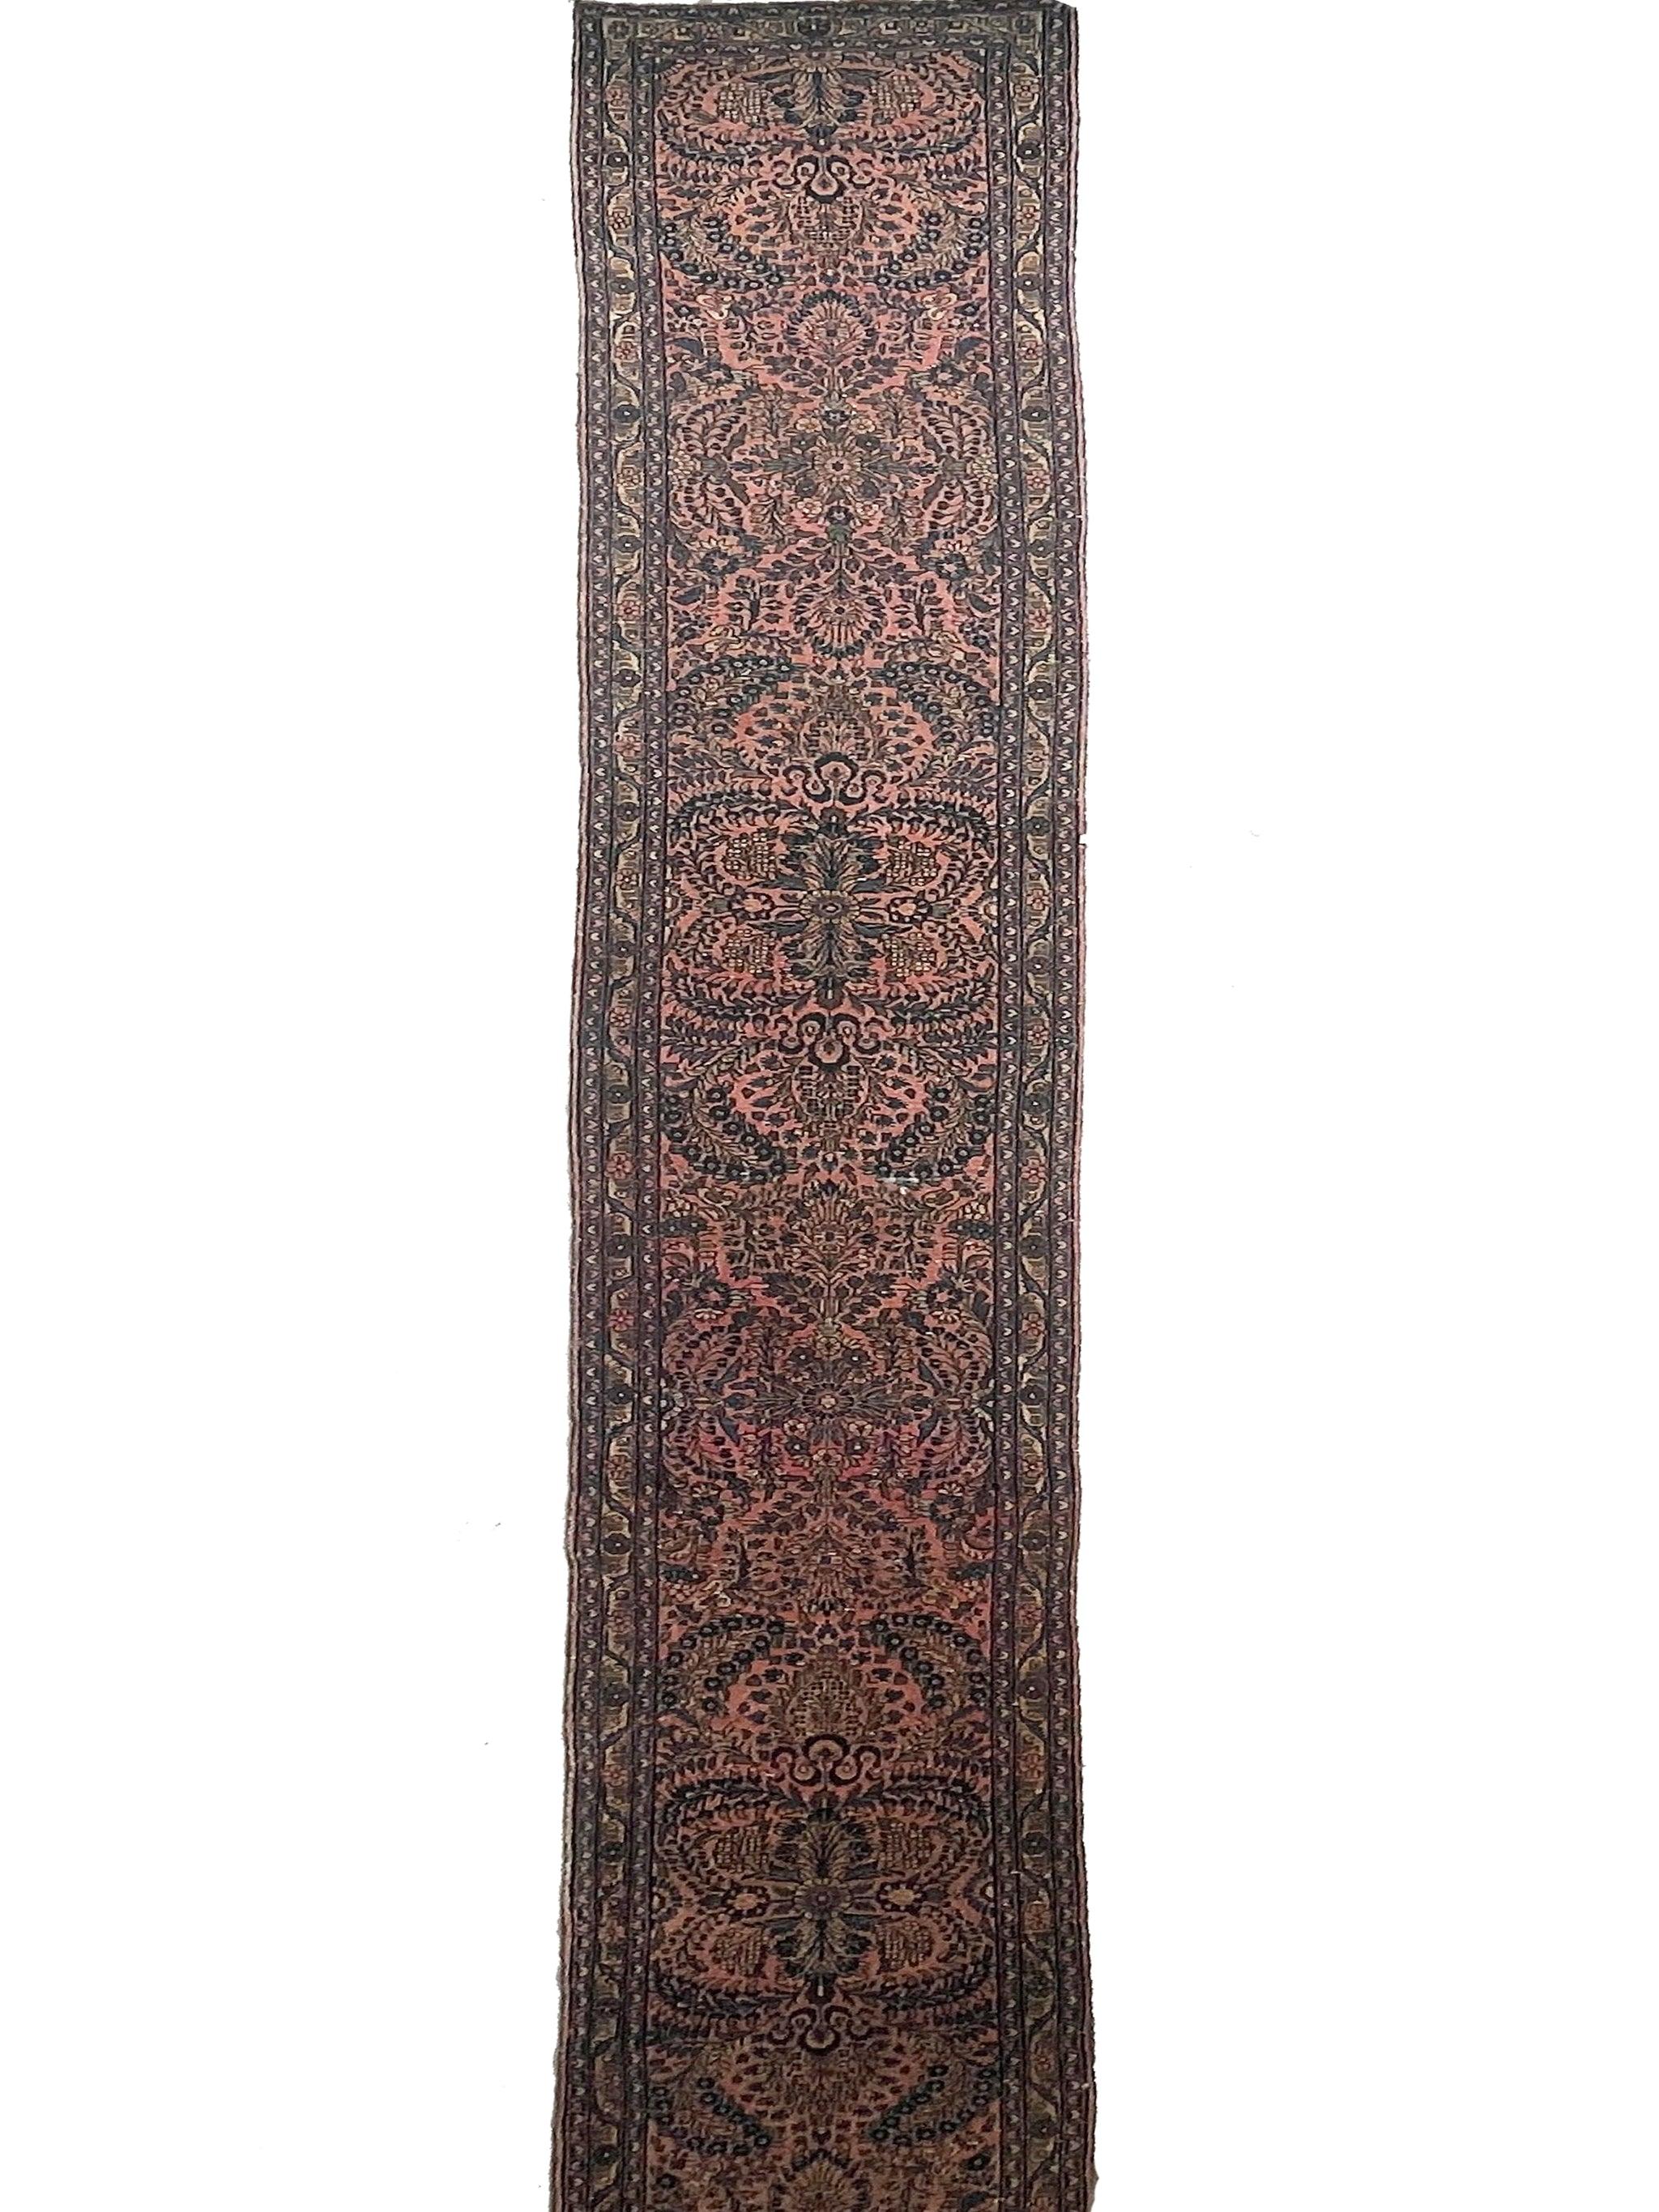 Perfect For Grand Stairway / Staircase Or Ballroom Hallway Vintage Sarouk Runner  Coral, Salmon, Moss/Sage Green, Blues, Mocha

About: Unbelievably unique size, not only in length but also in width! 2.9 feet wide is remarkably narrow and perfect for